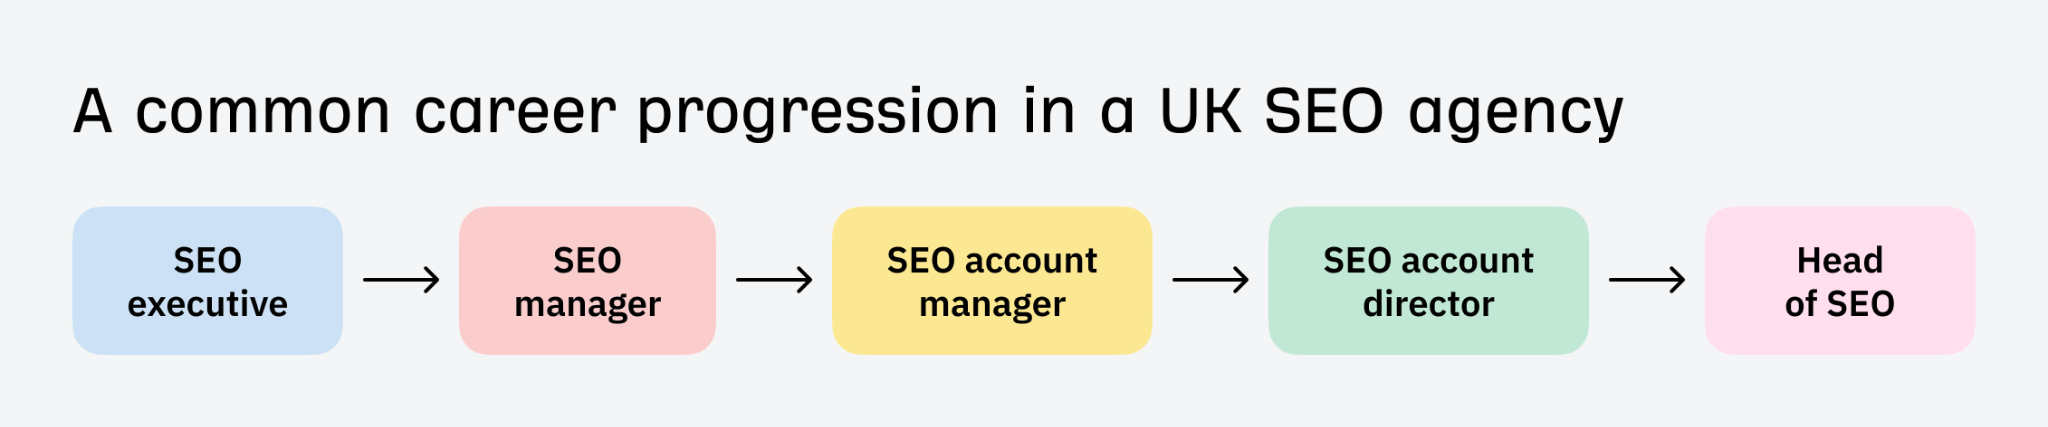 a-common-career-progression-in-a-uk-seo-agency I Analyzed 52 SEO Specialist Job Listings. Here’s What They Do and How You Can Become One